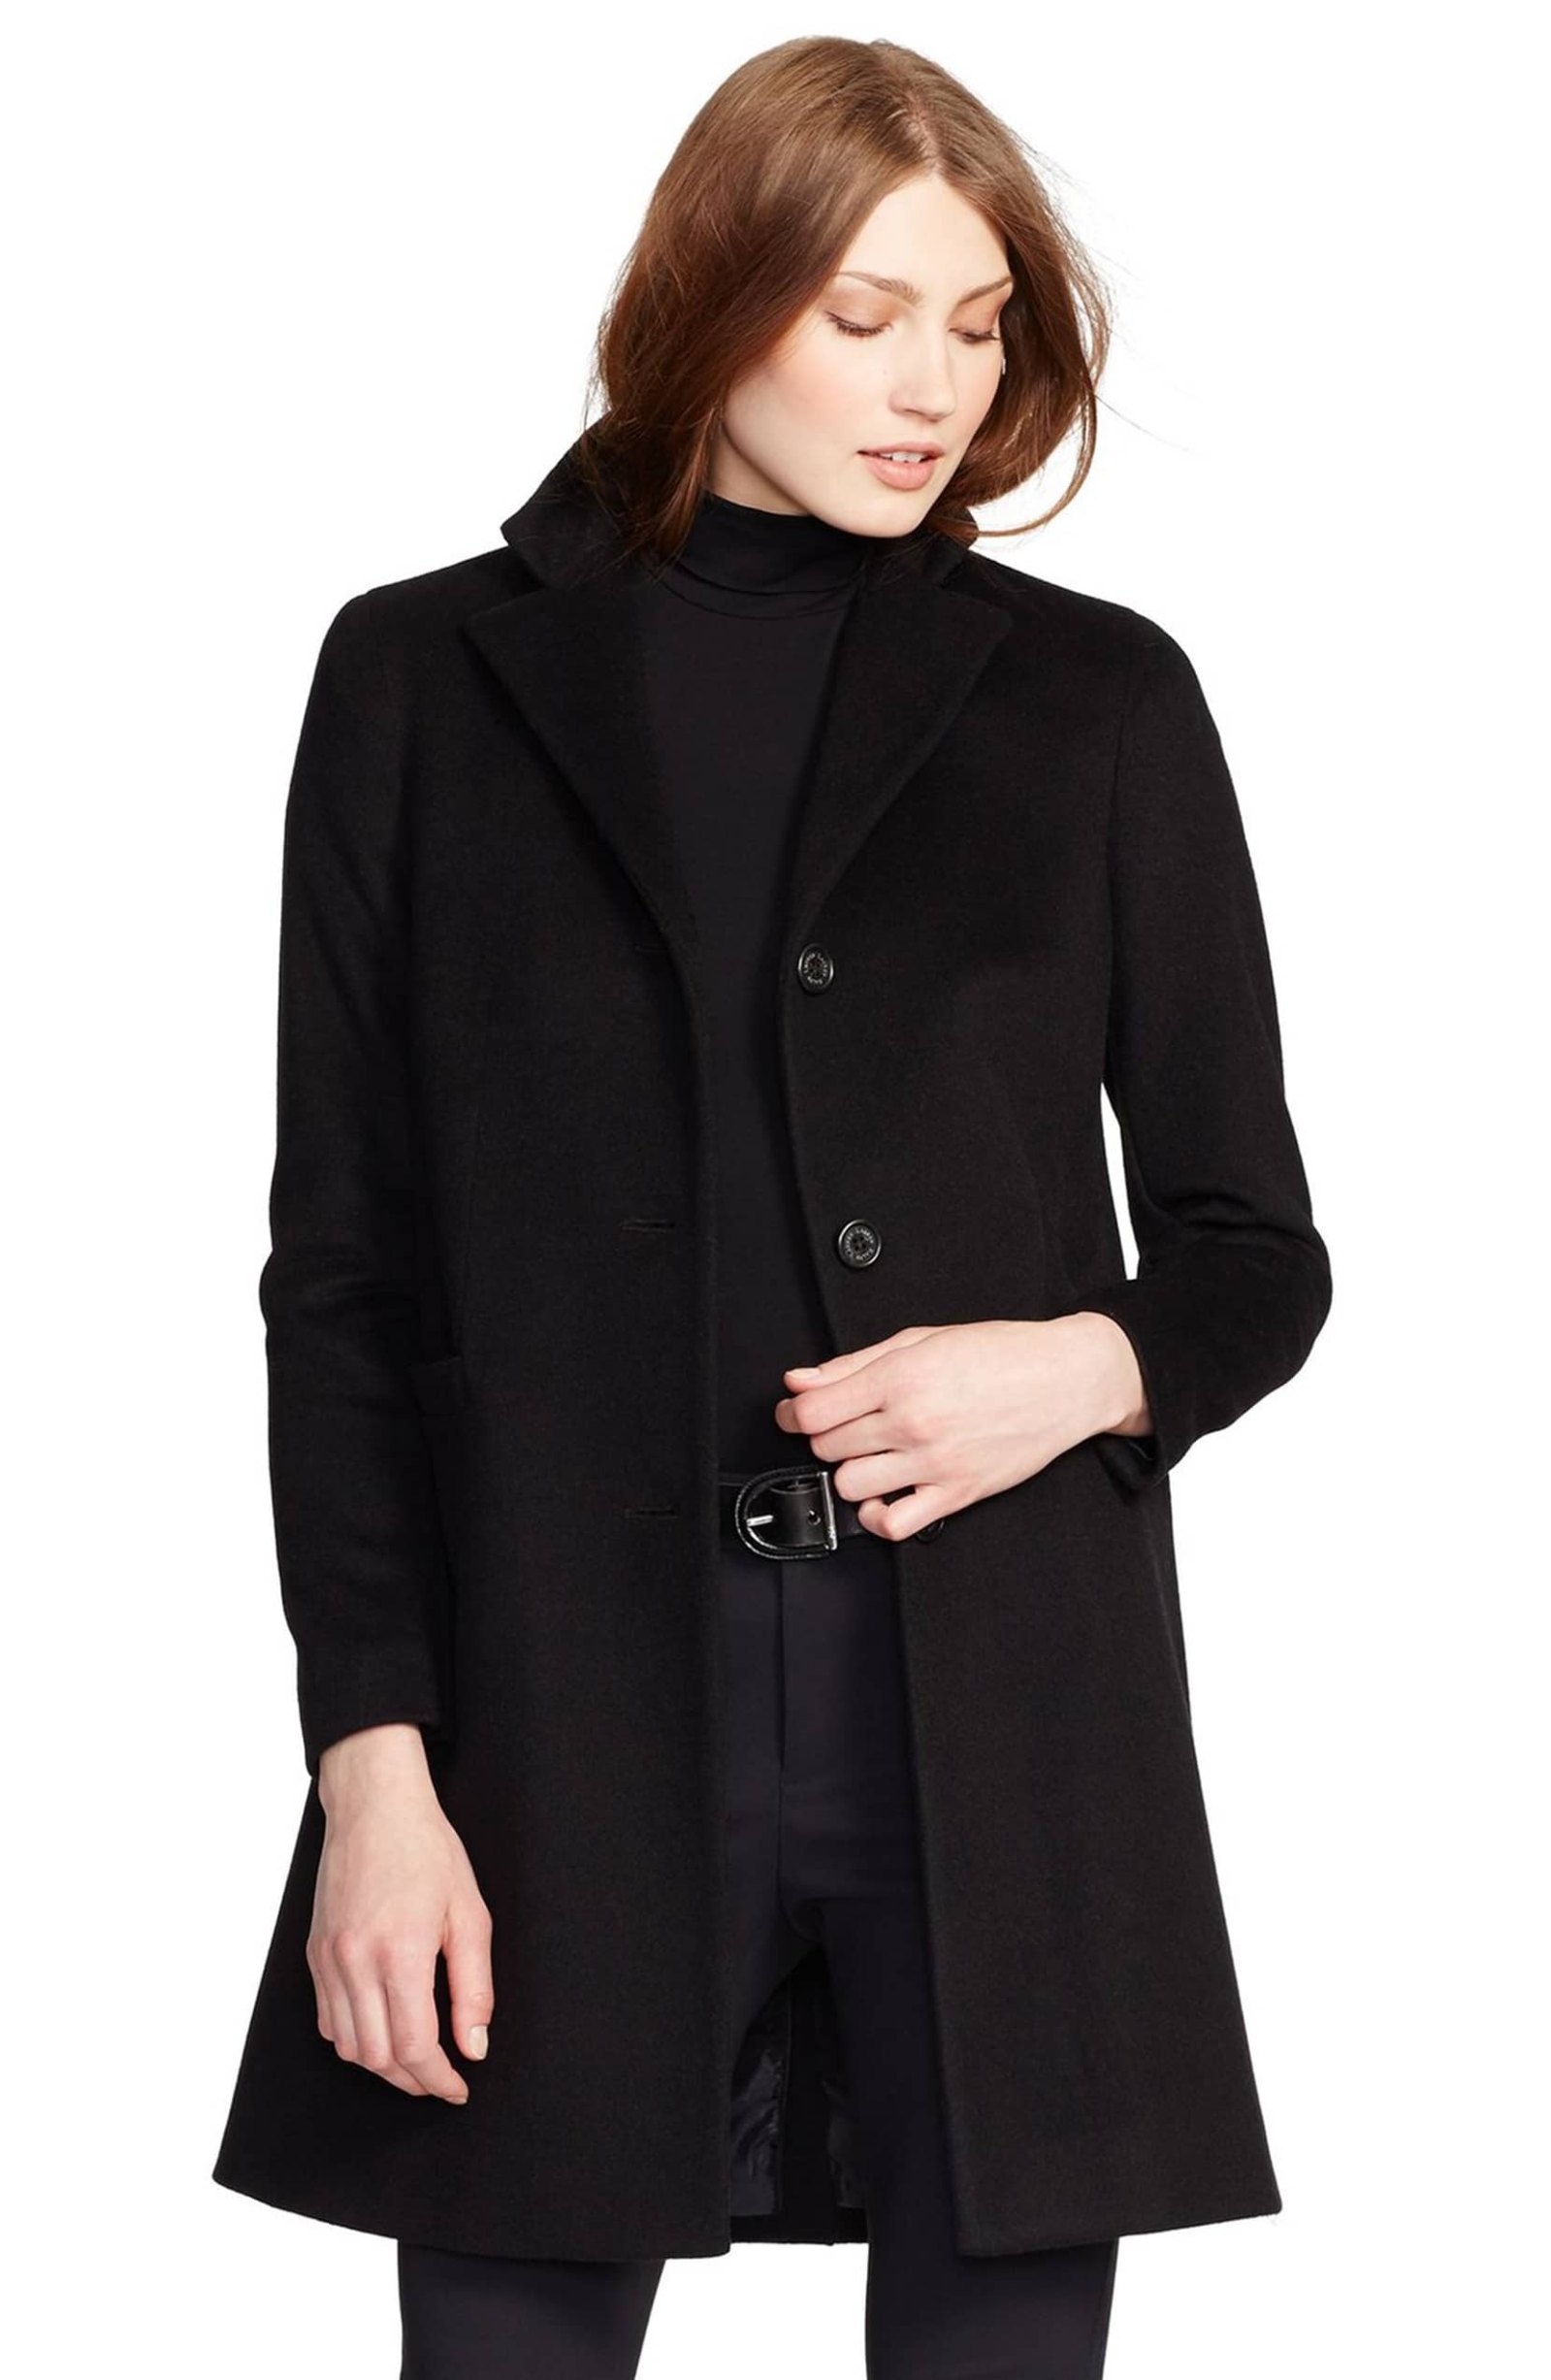 Winter Fashion: Stay Stylishly Warm in This Ralph Lauren Coat